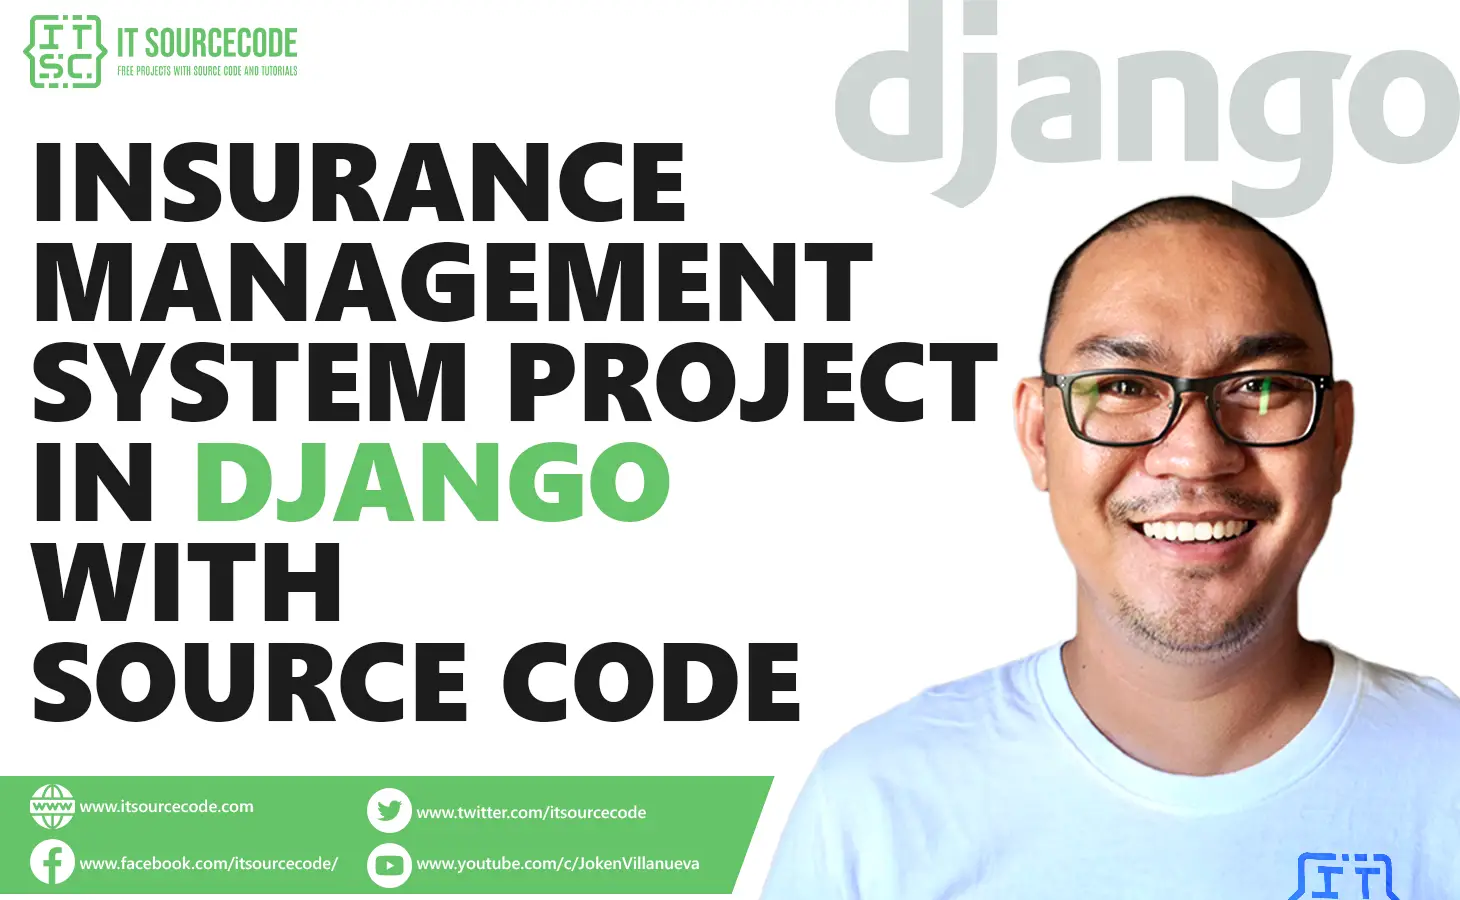 Insurance Management System Project in Django with Source Code